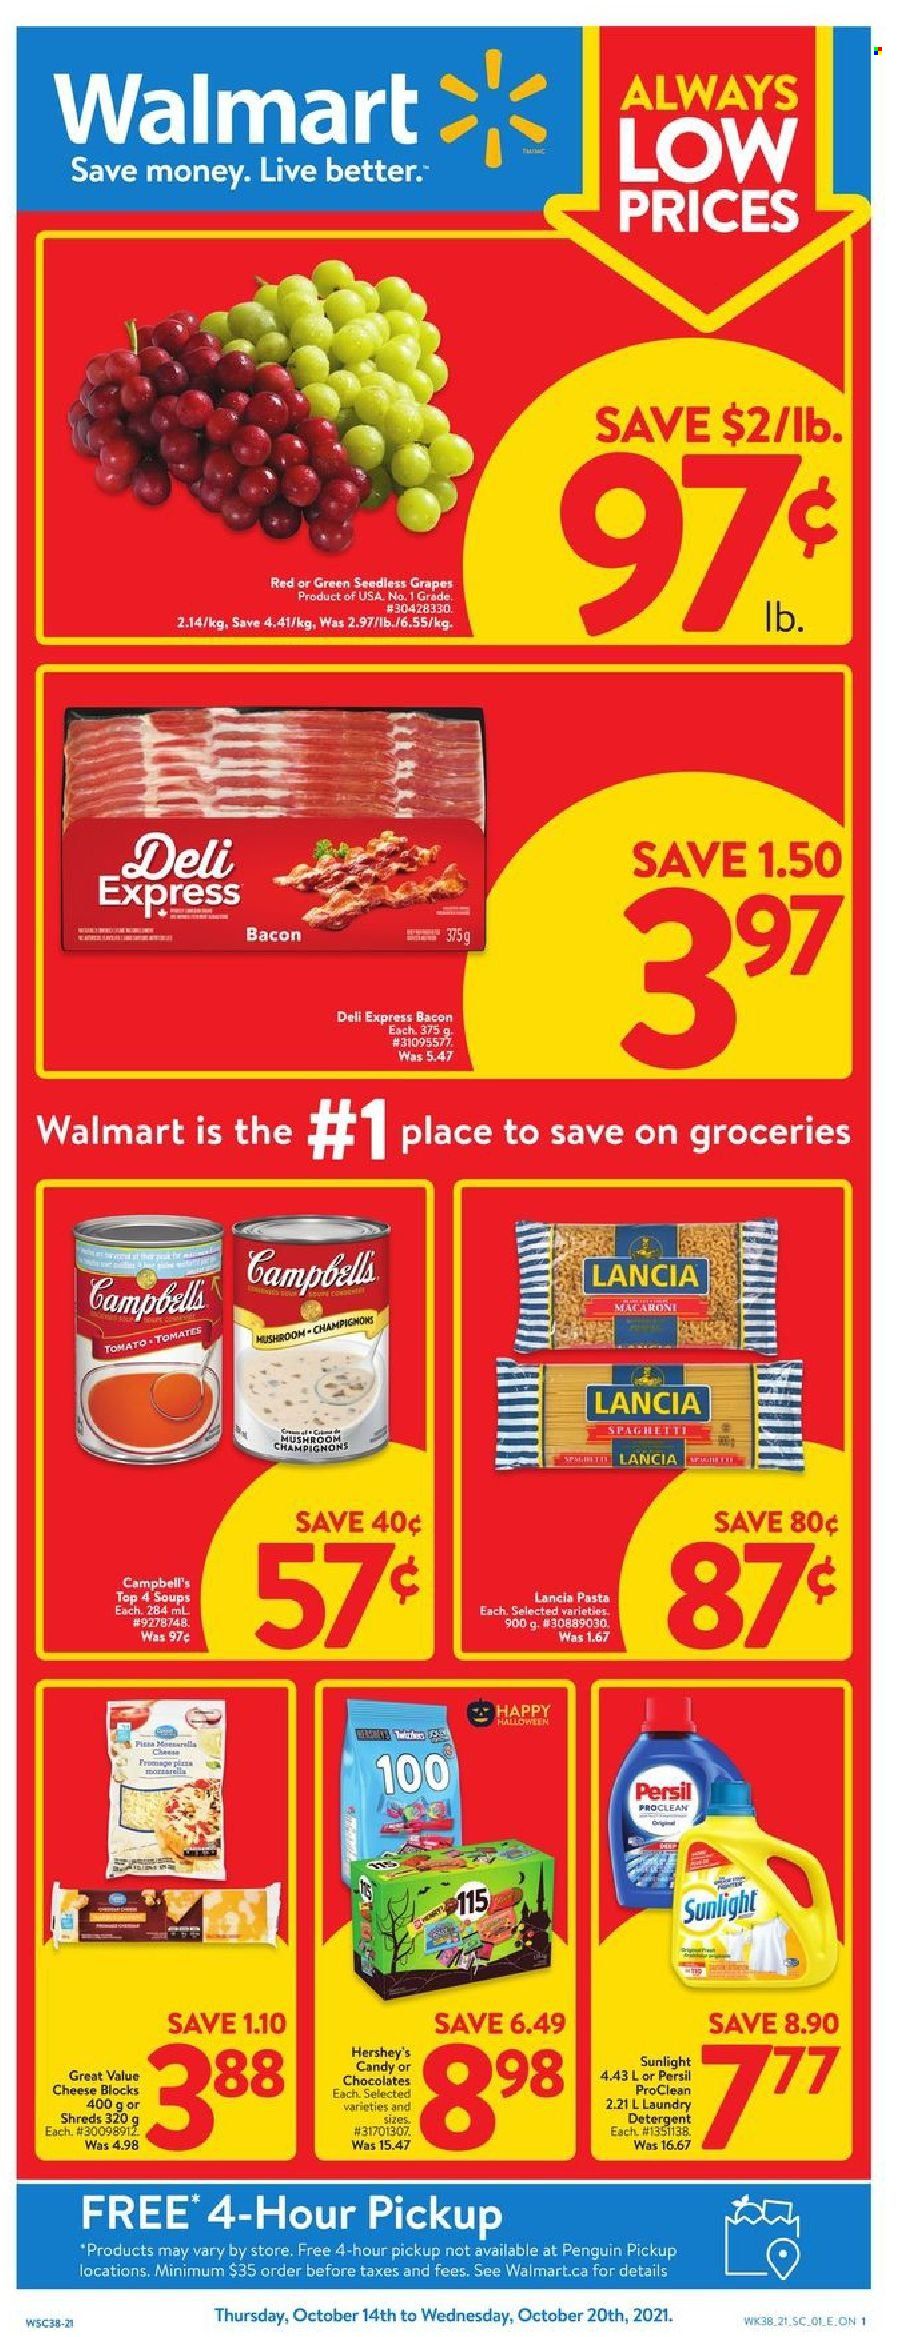 thumbnail - Walmart Flyer - October 14, 2021 - October 20, 2021 - Sales products - mushrooms, grapes, seedless grapes, Campbell's, spaghetti, macaroni, pasta, bacon, cheese, Hershey's, chocolate, L'Or, Persil, laundry detergent, Sunlight, penguin, detergent. Page 1.